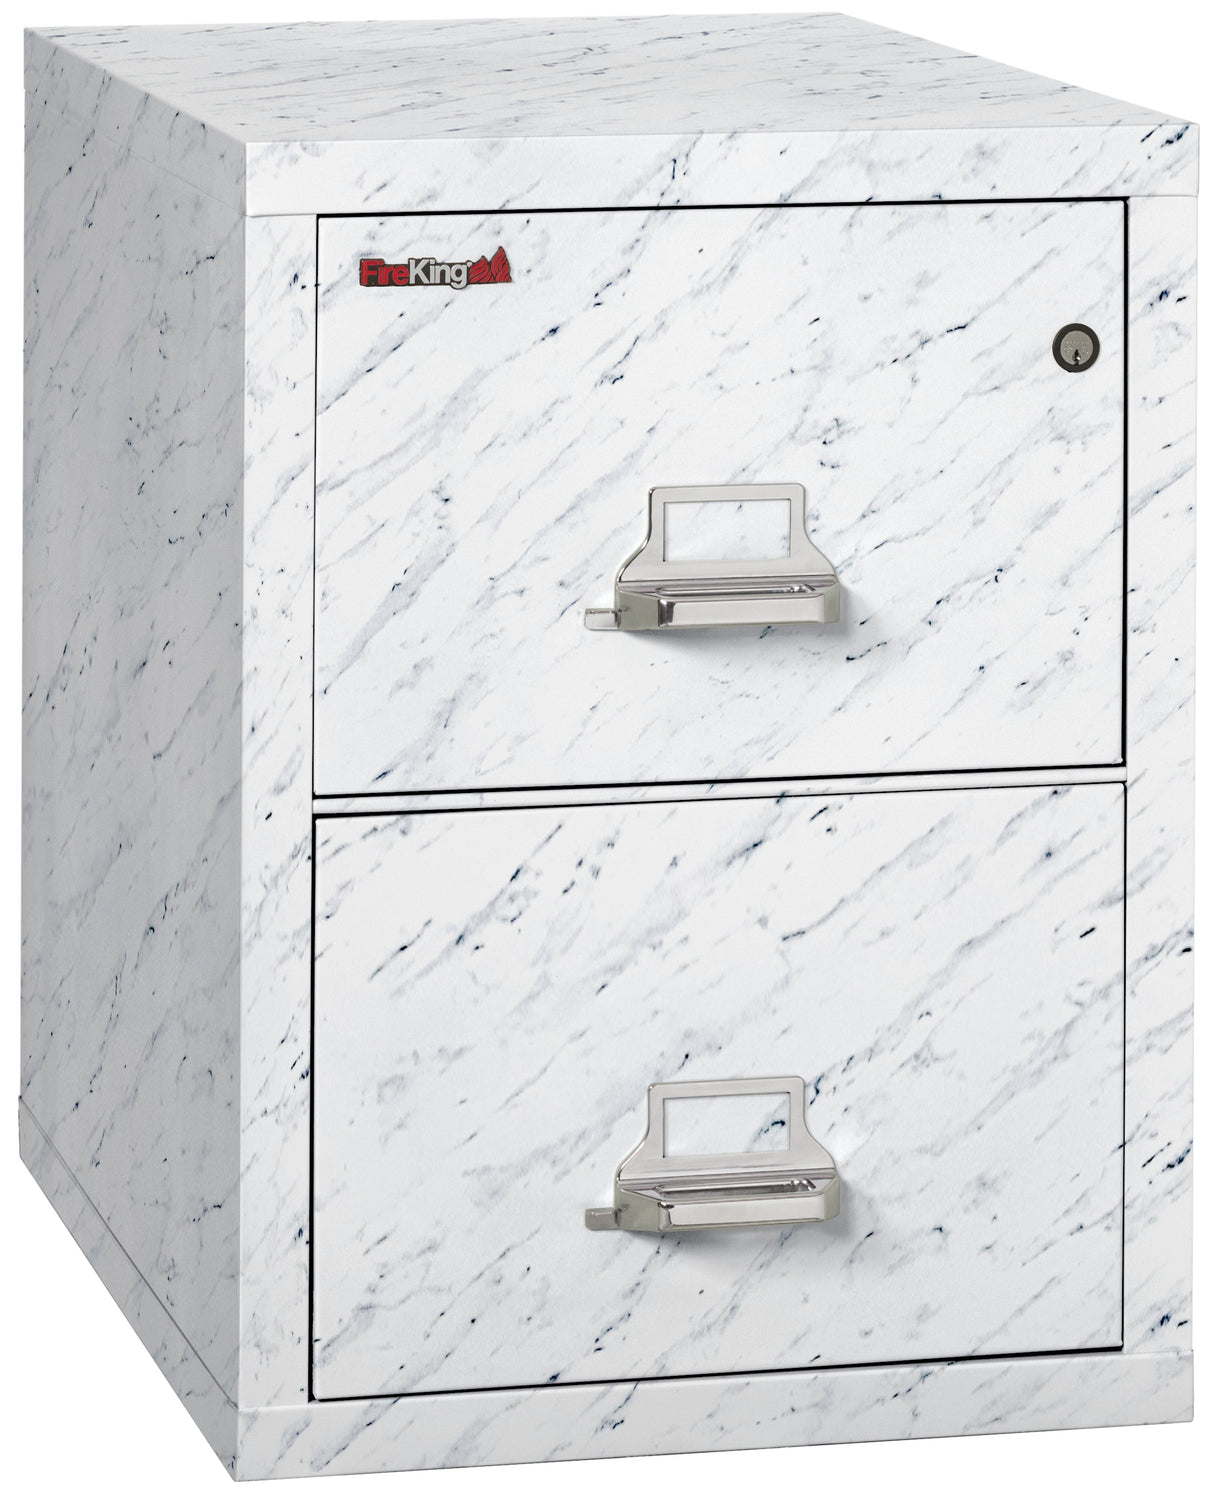 FireKing Designer Series 31" Vertical File Cabinet (1-Hour Fire-Rated & High Security)